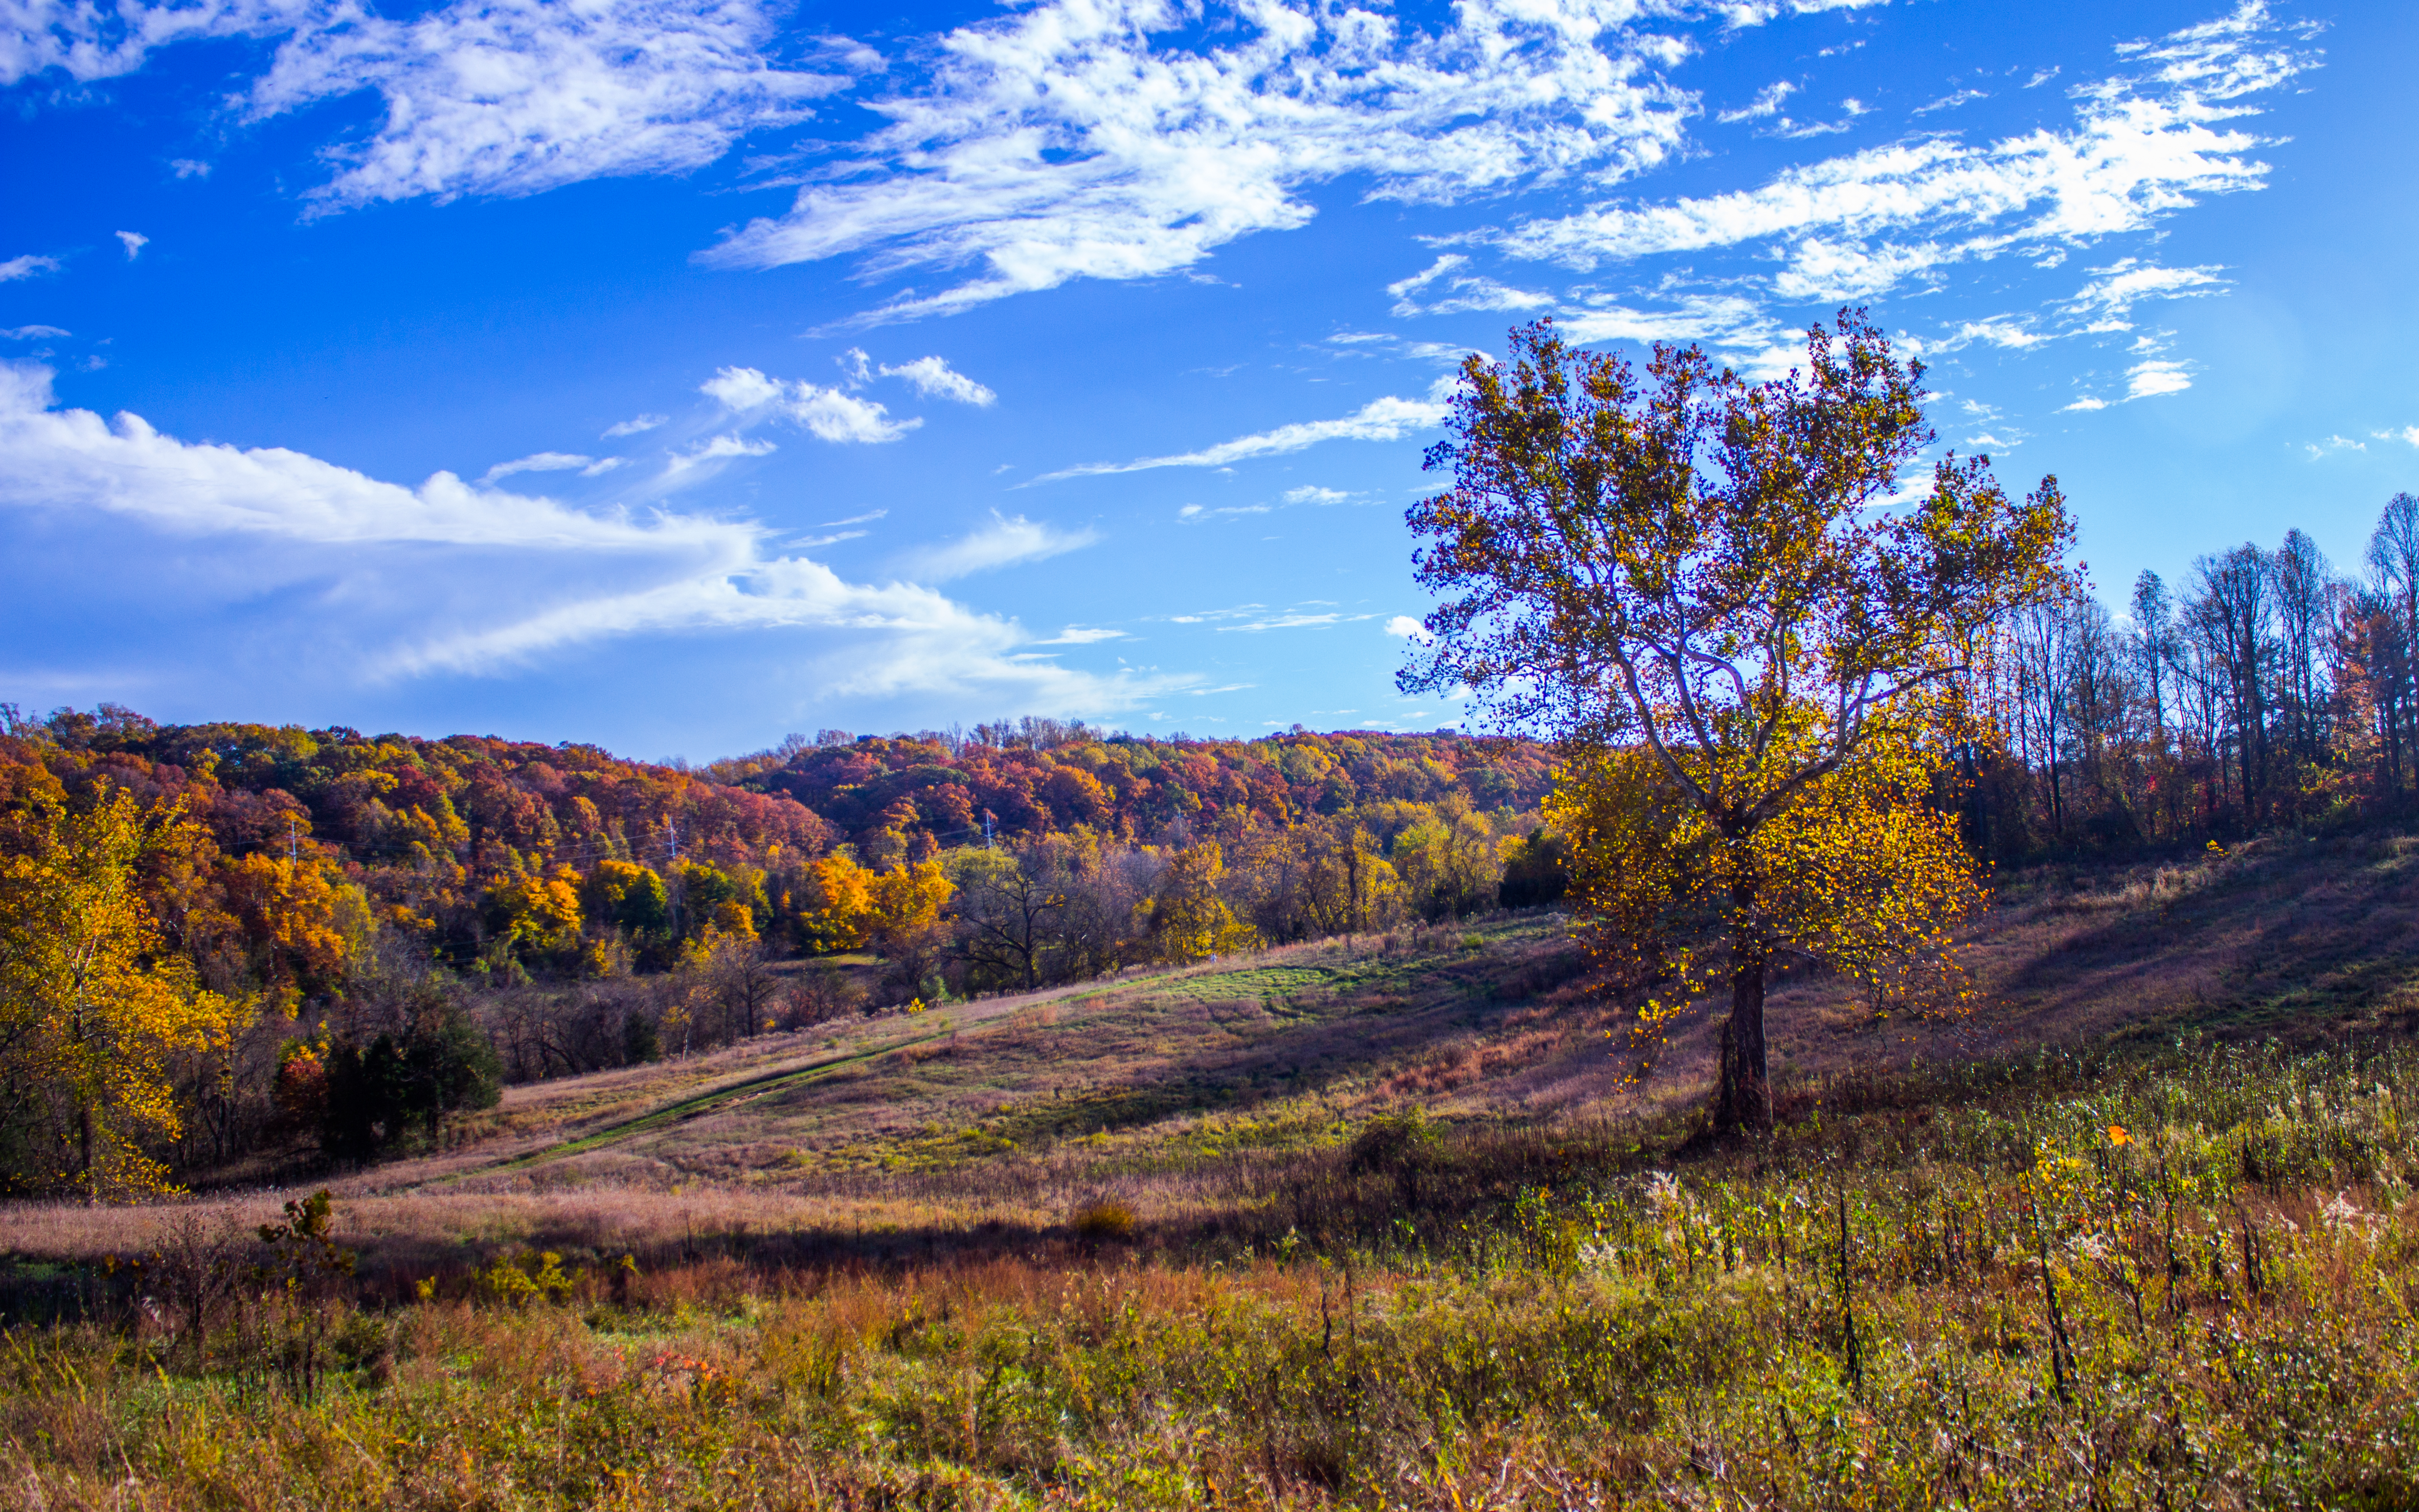 General 4731x2957 fall trees grass field forest landscape clear sky clouds nature Baltimore Cromwell Valley Park